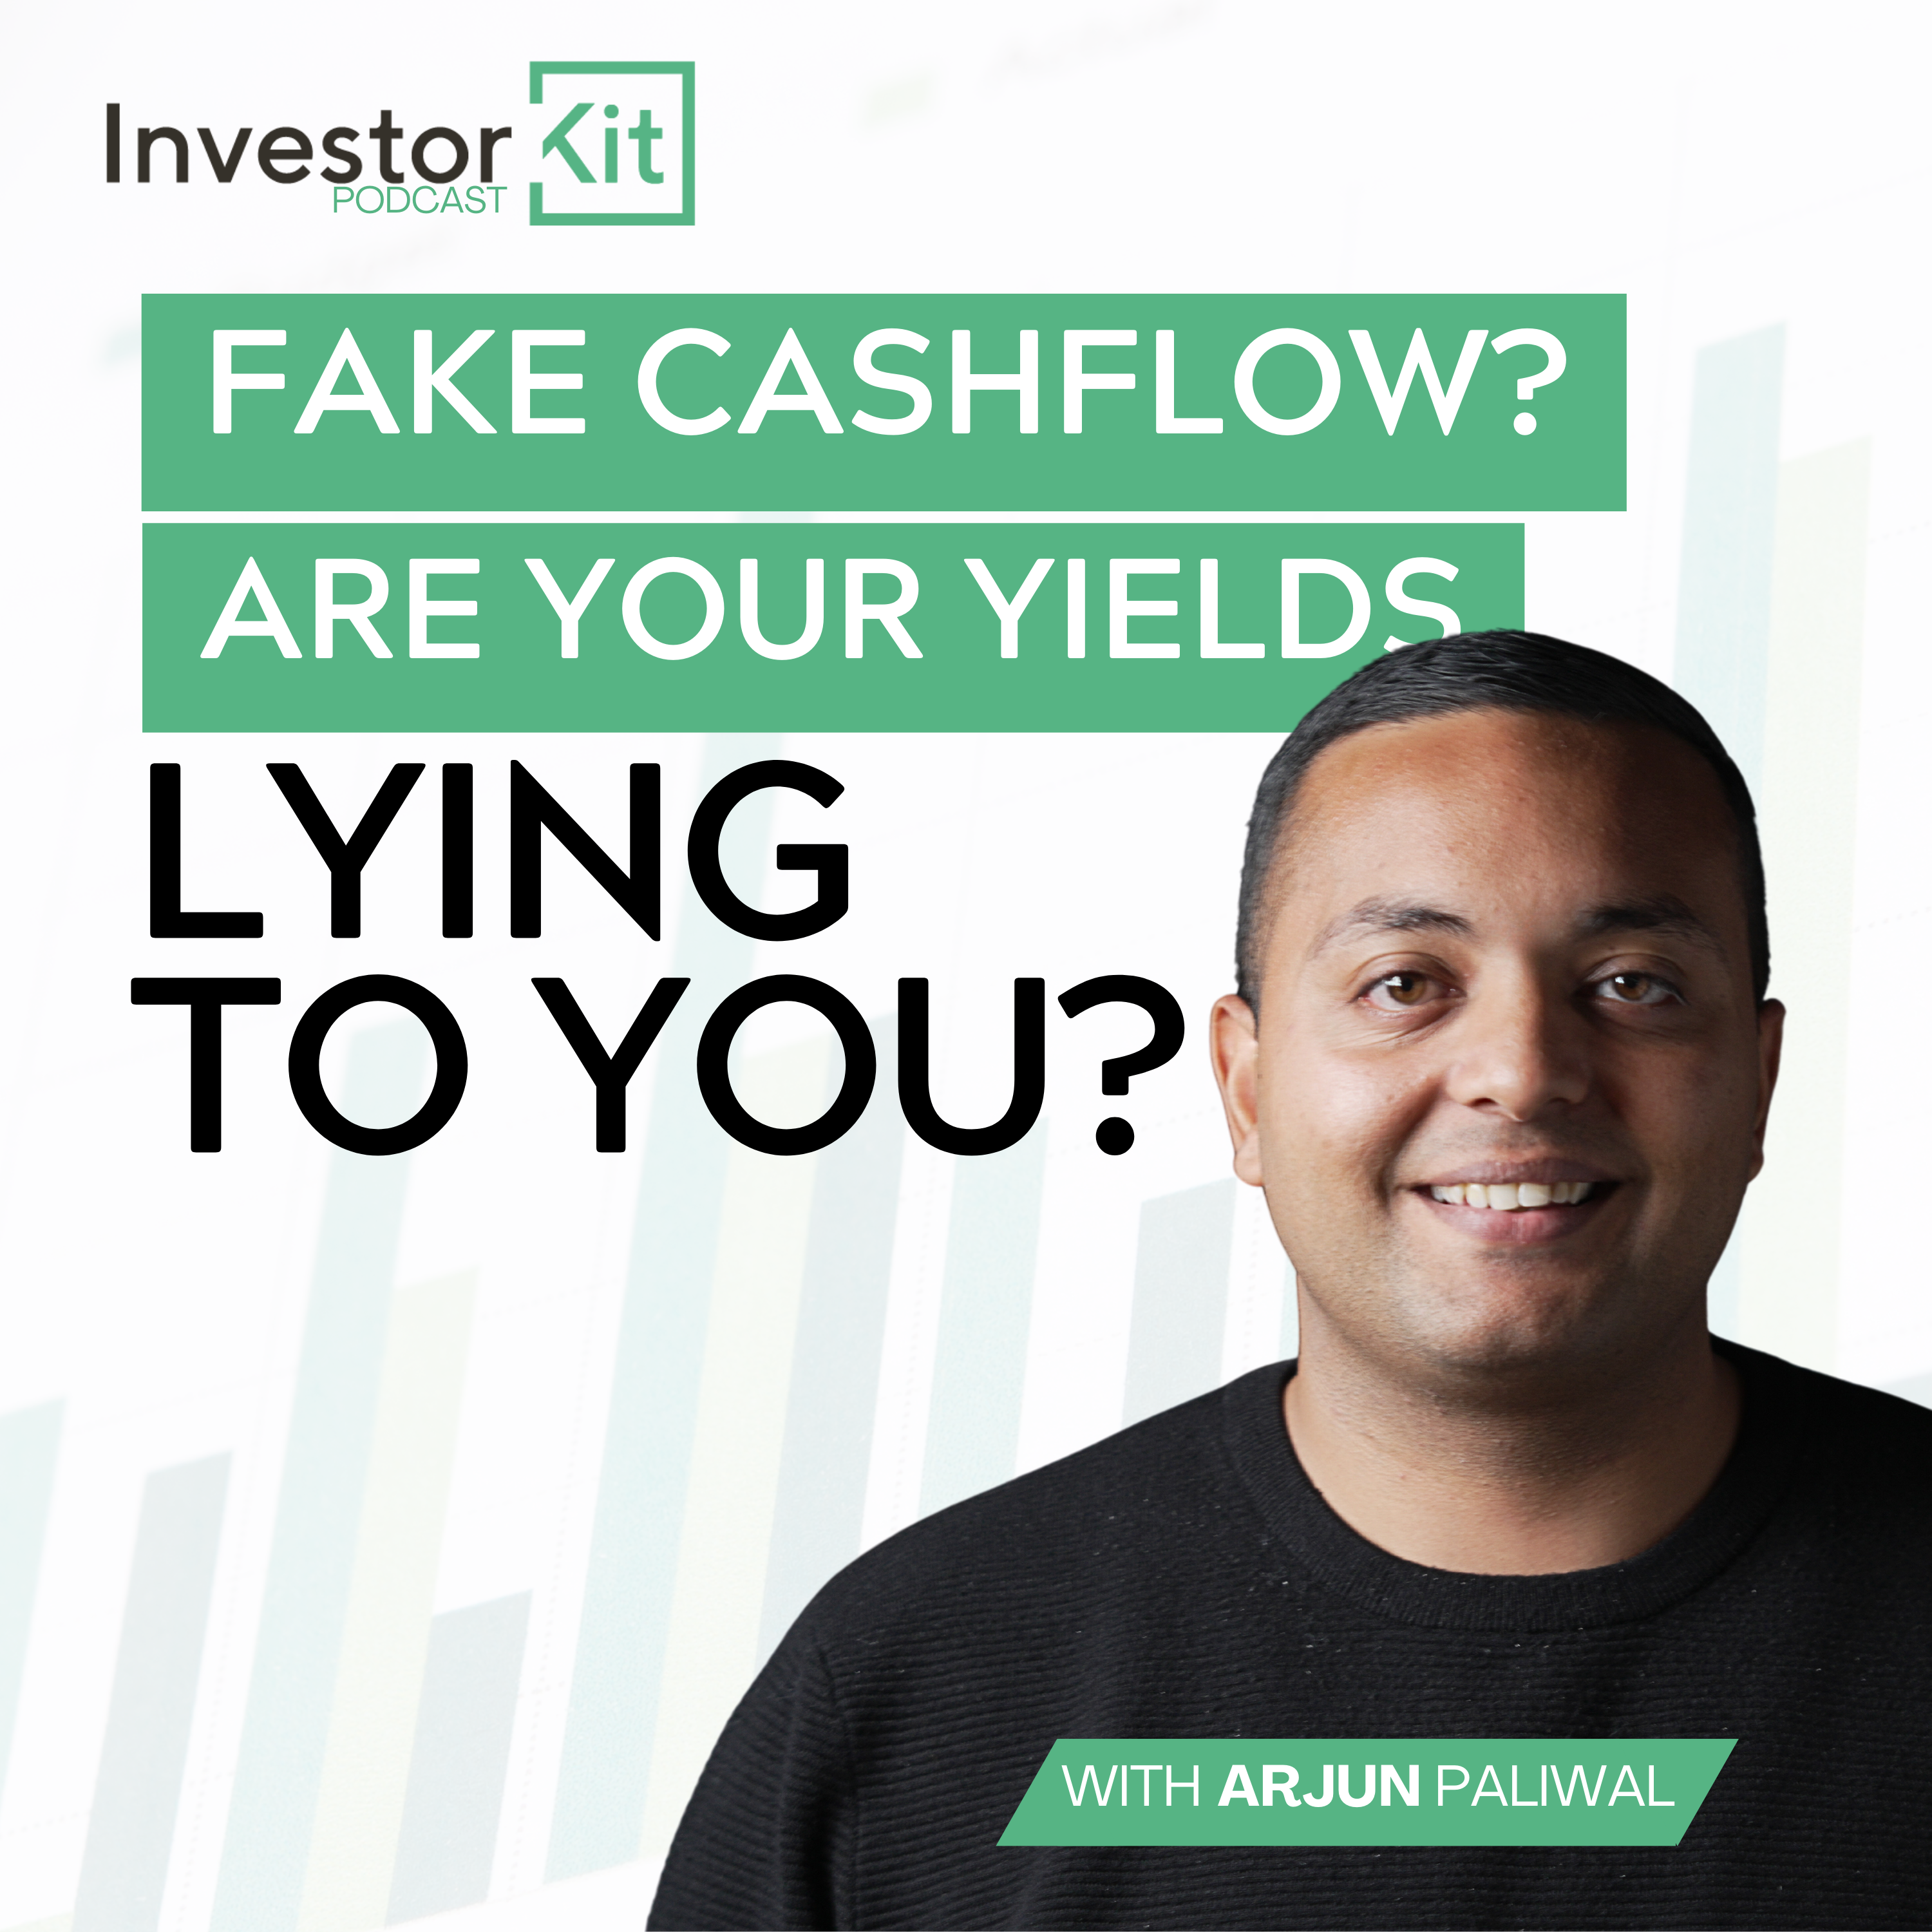 Fake Cashflow? Are Your Yields Lying To You?